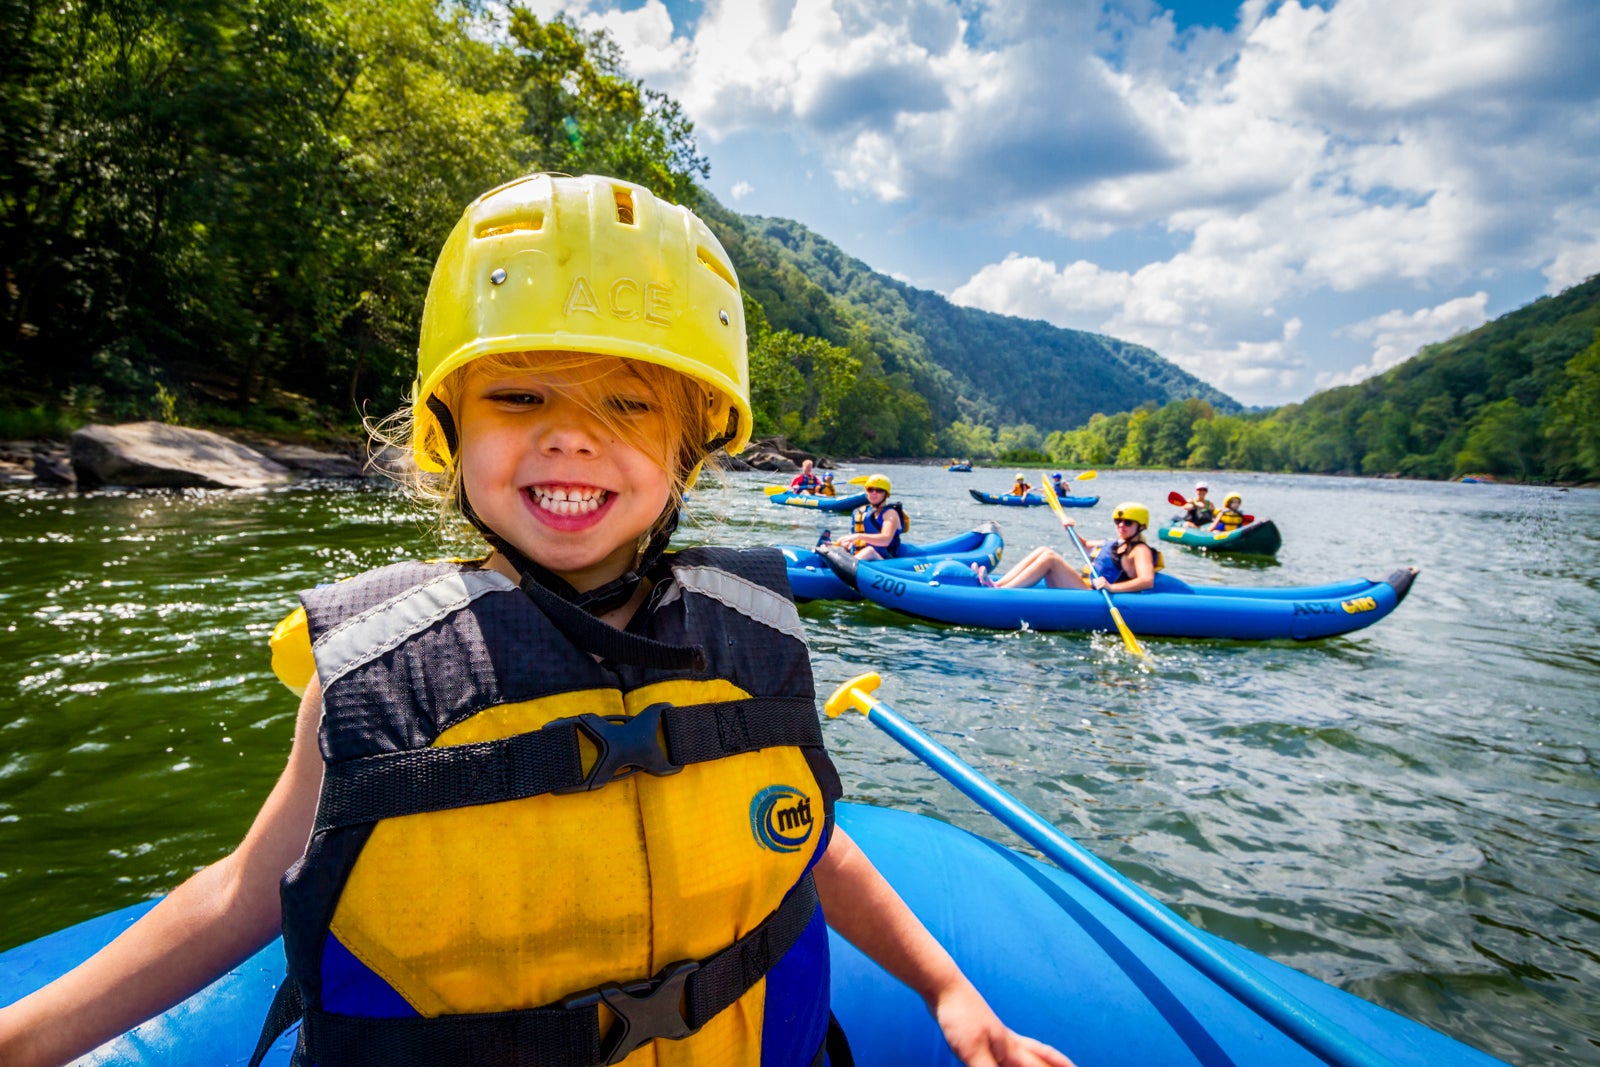 New River Gorge National Park whitewater rafting